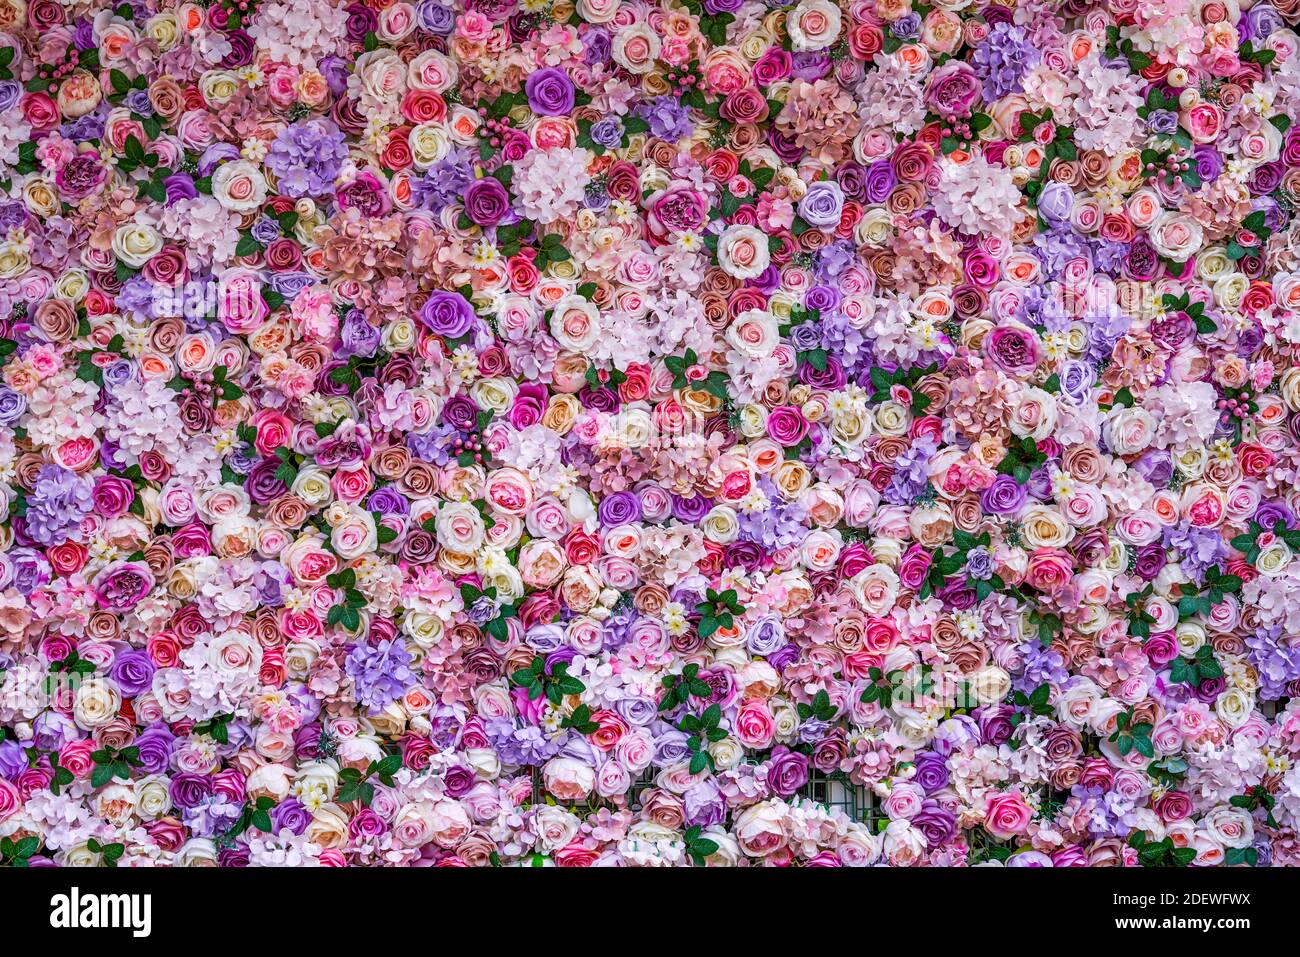 Flower wall background composed of colorful flowers Stock Photo - Alamy